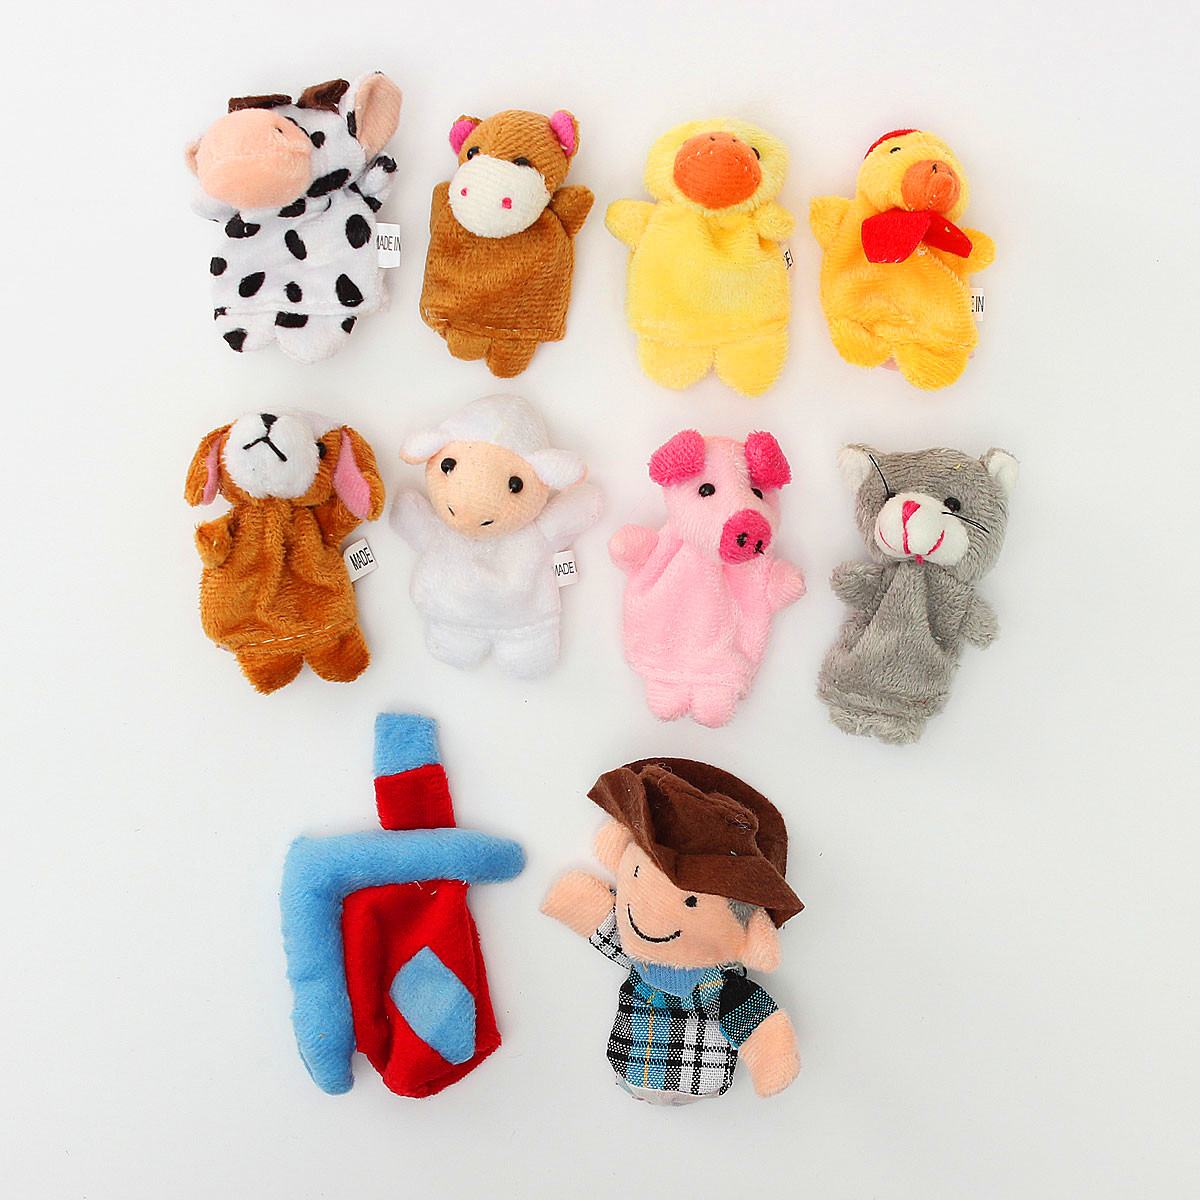 10-PCs-Family-Finger-Puppets-Cloth-Doll-Baby-Educational-Hand-Toy-965409